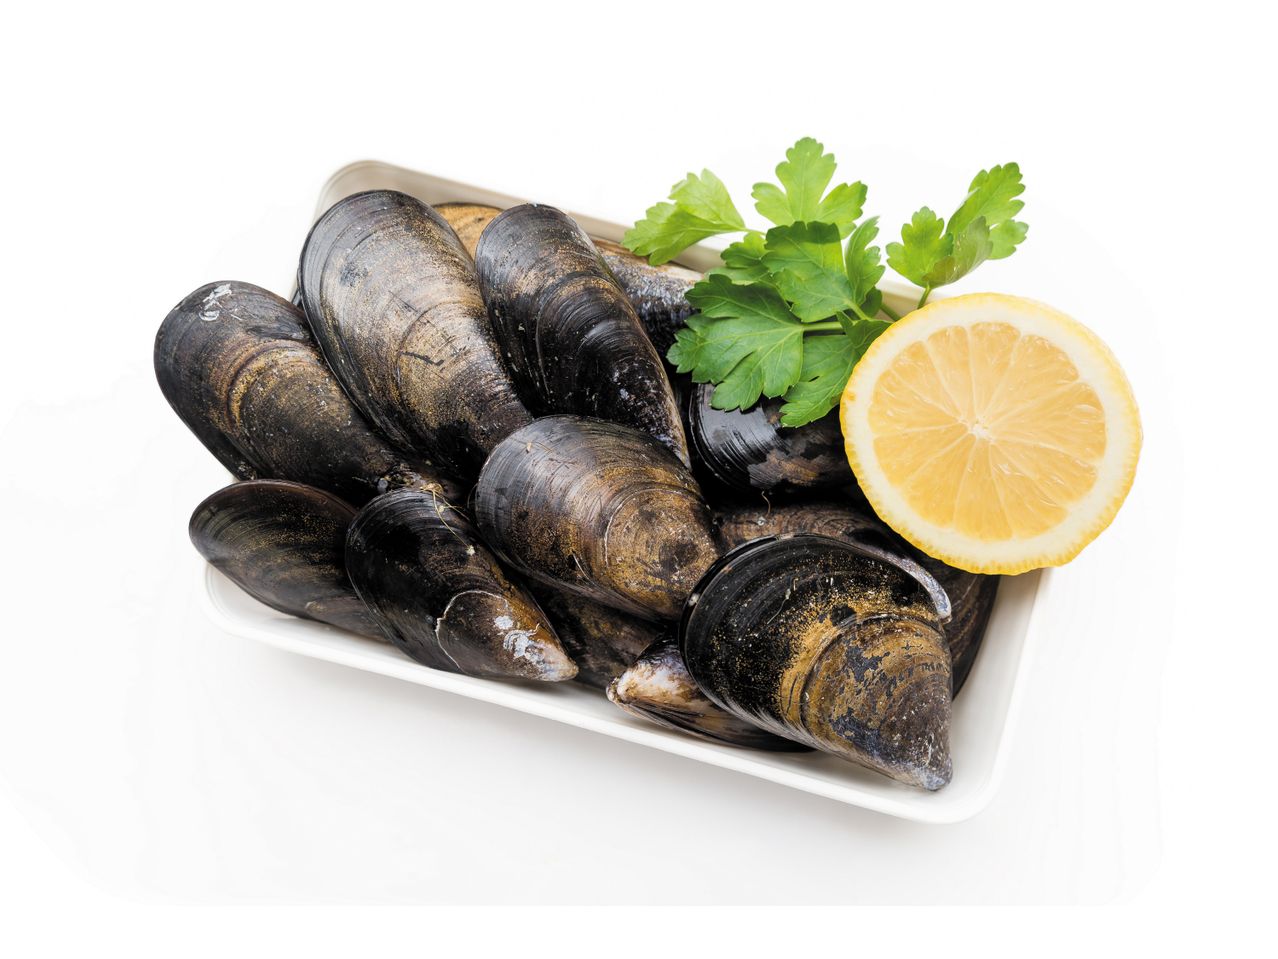 Go to full screen view: Mussels - Image 1